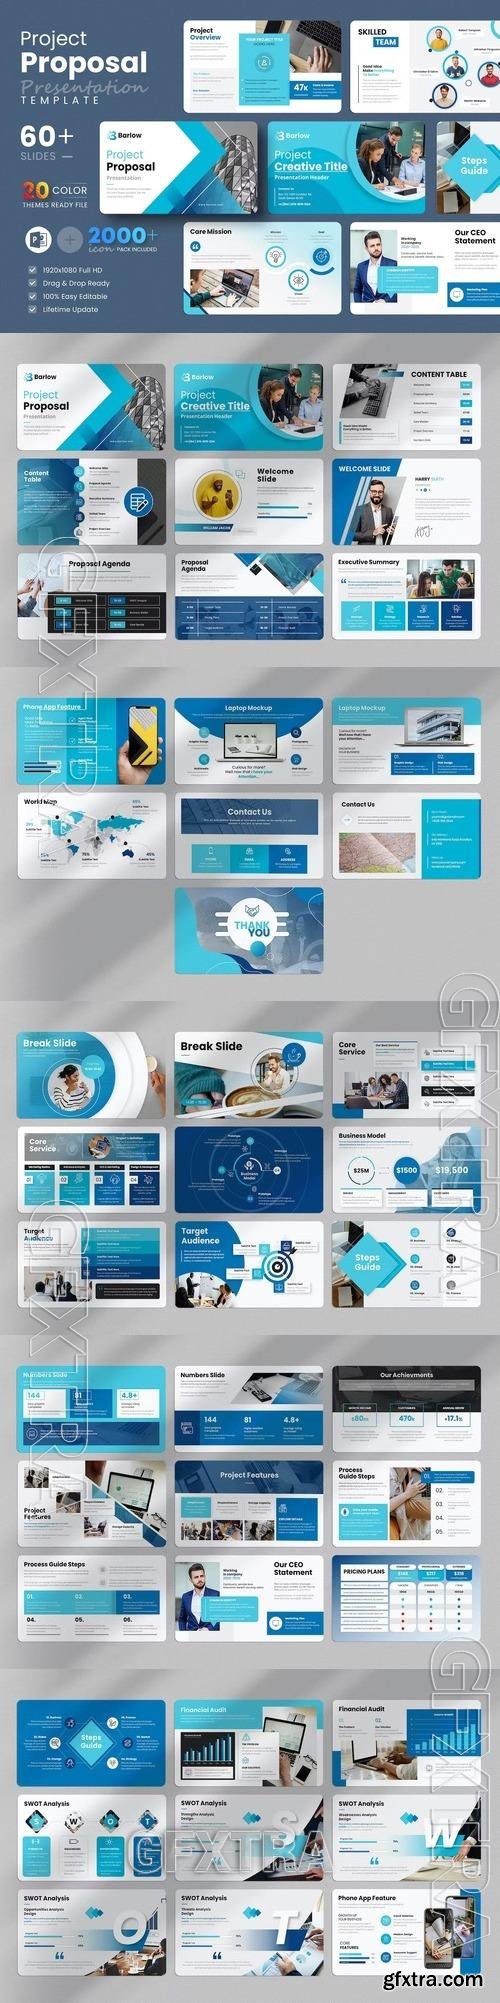 Project Proposal PowerPoint Presentation Template S5VWMNG